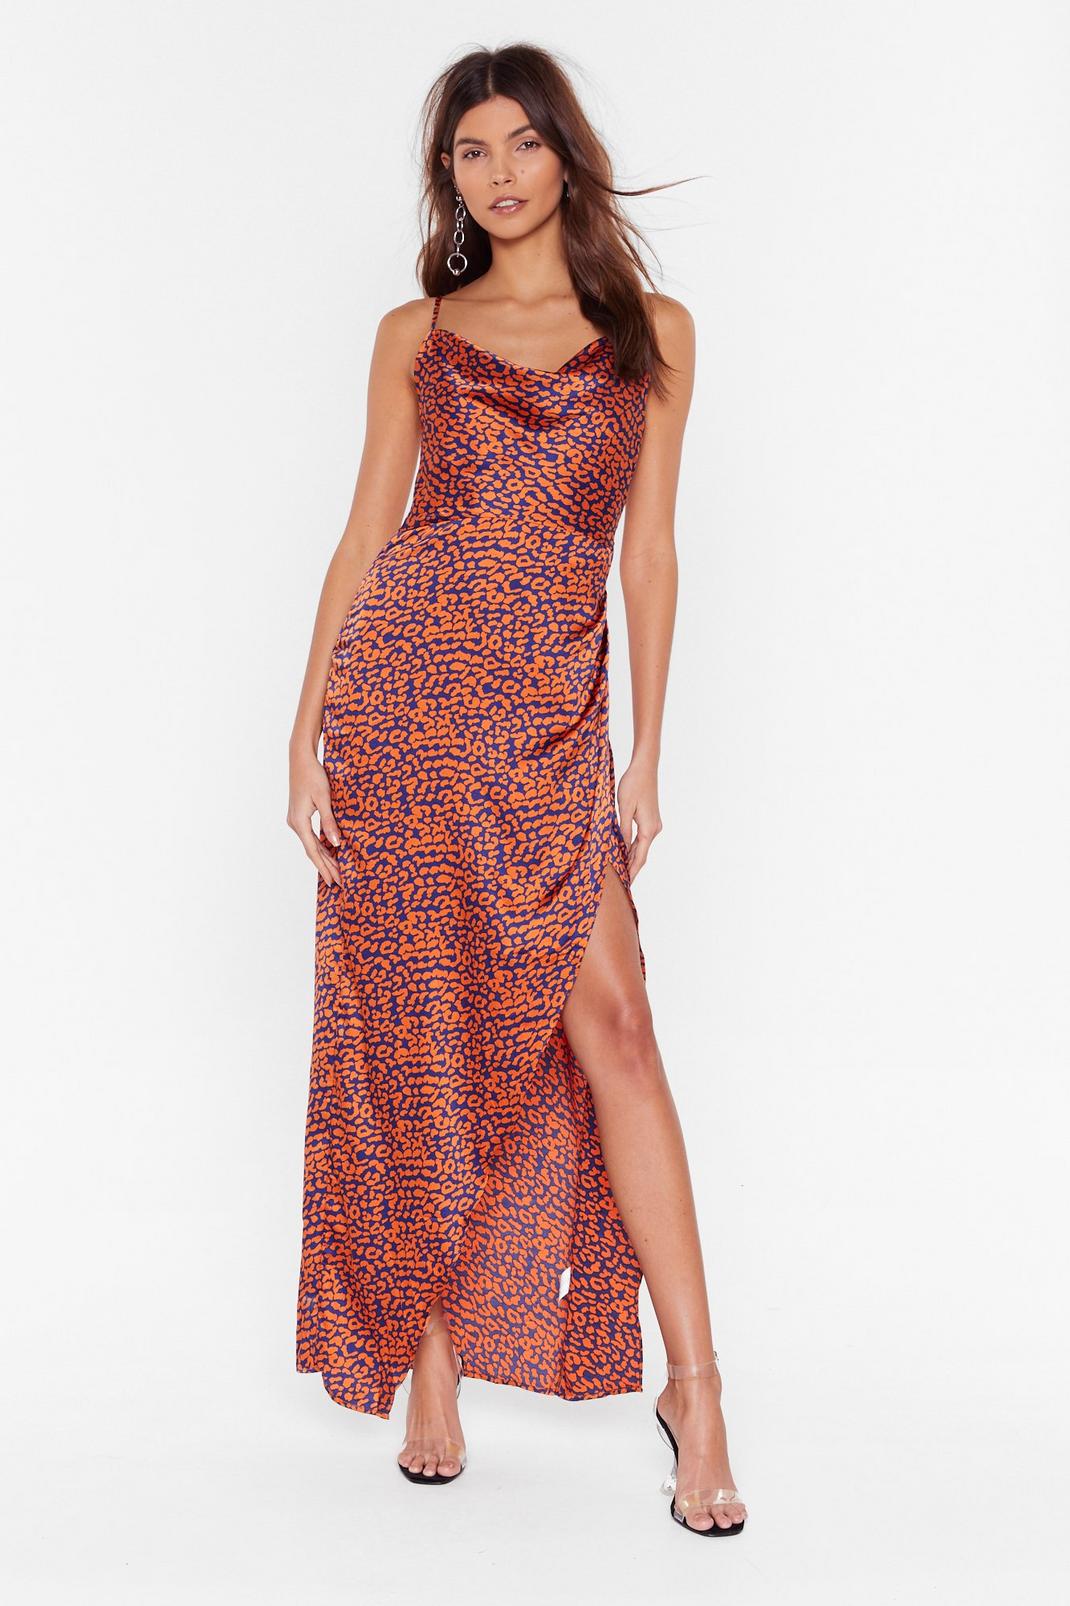 Cheetah Maxi Dress with Cowl Neckline image number 1